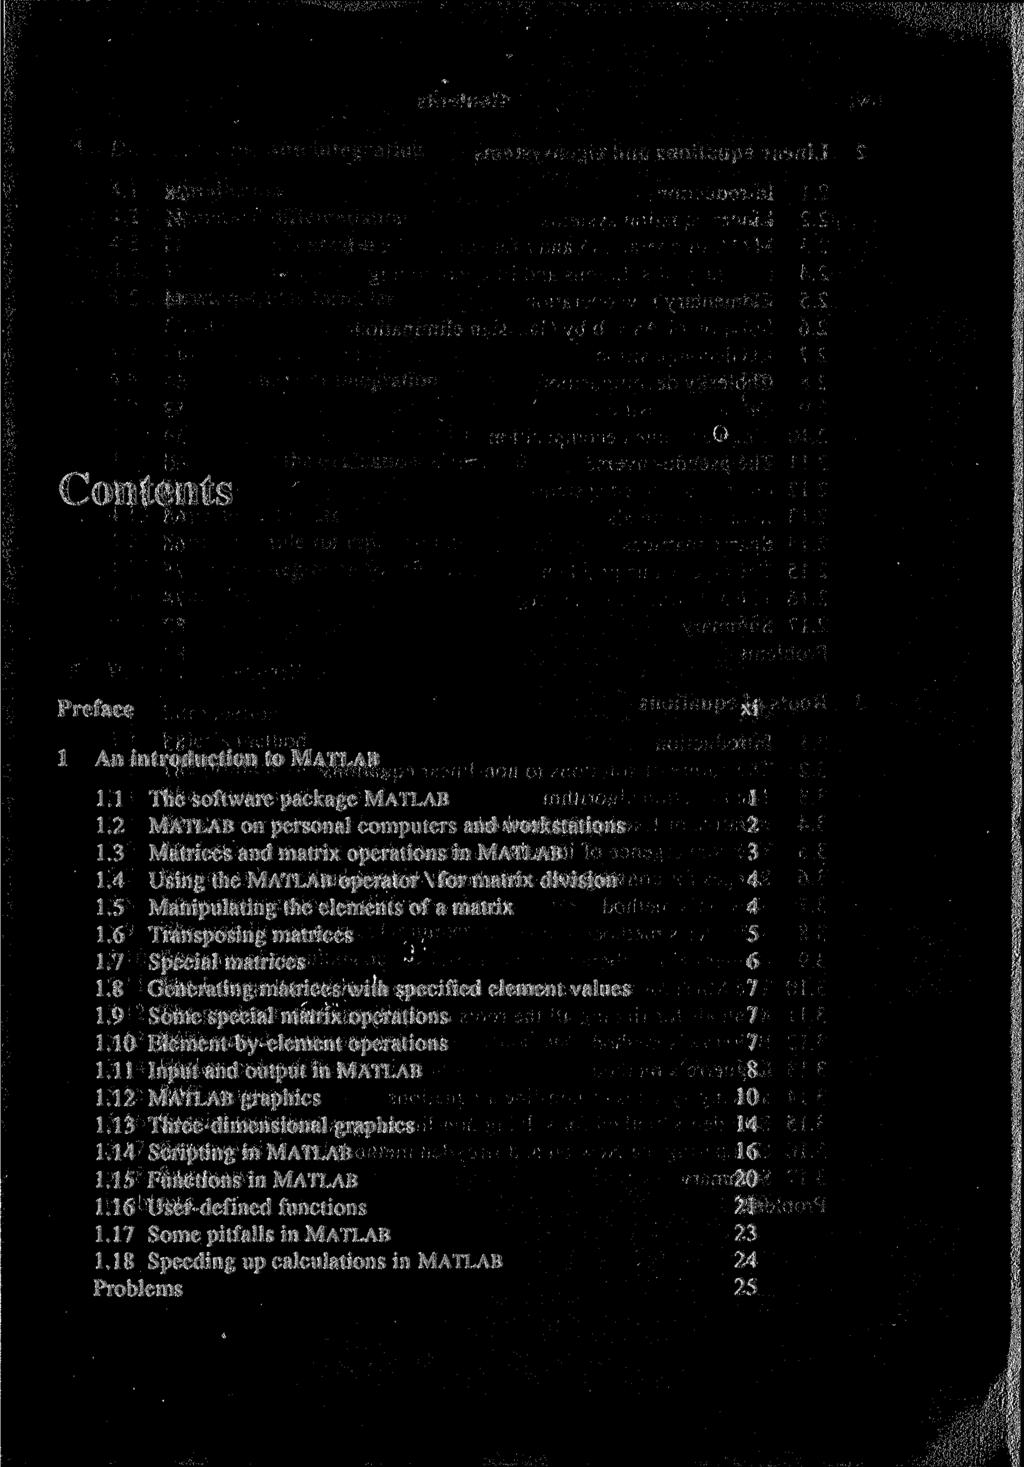 Preface 1 An introduction to MATLAB 1.1 The software package MATLAB 1.2 MATLAB on personal computers and workstations 1.3 Matrices and matrix operations in MATLAB 1.